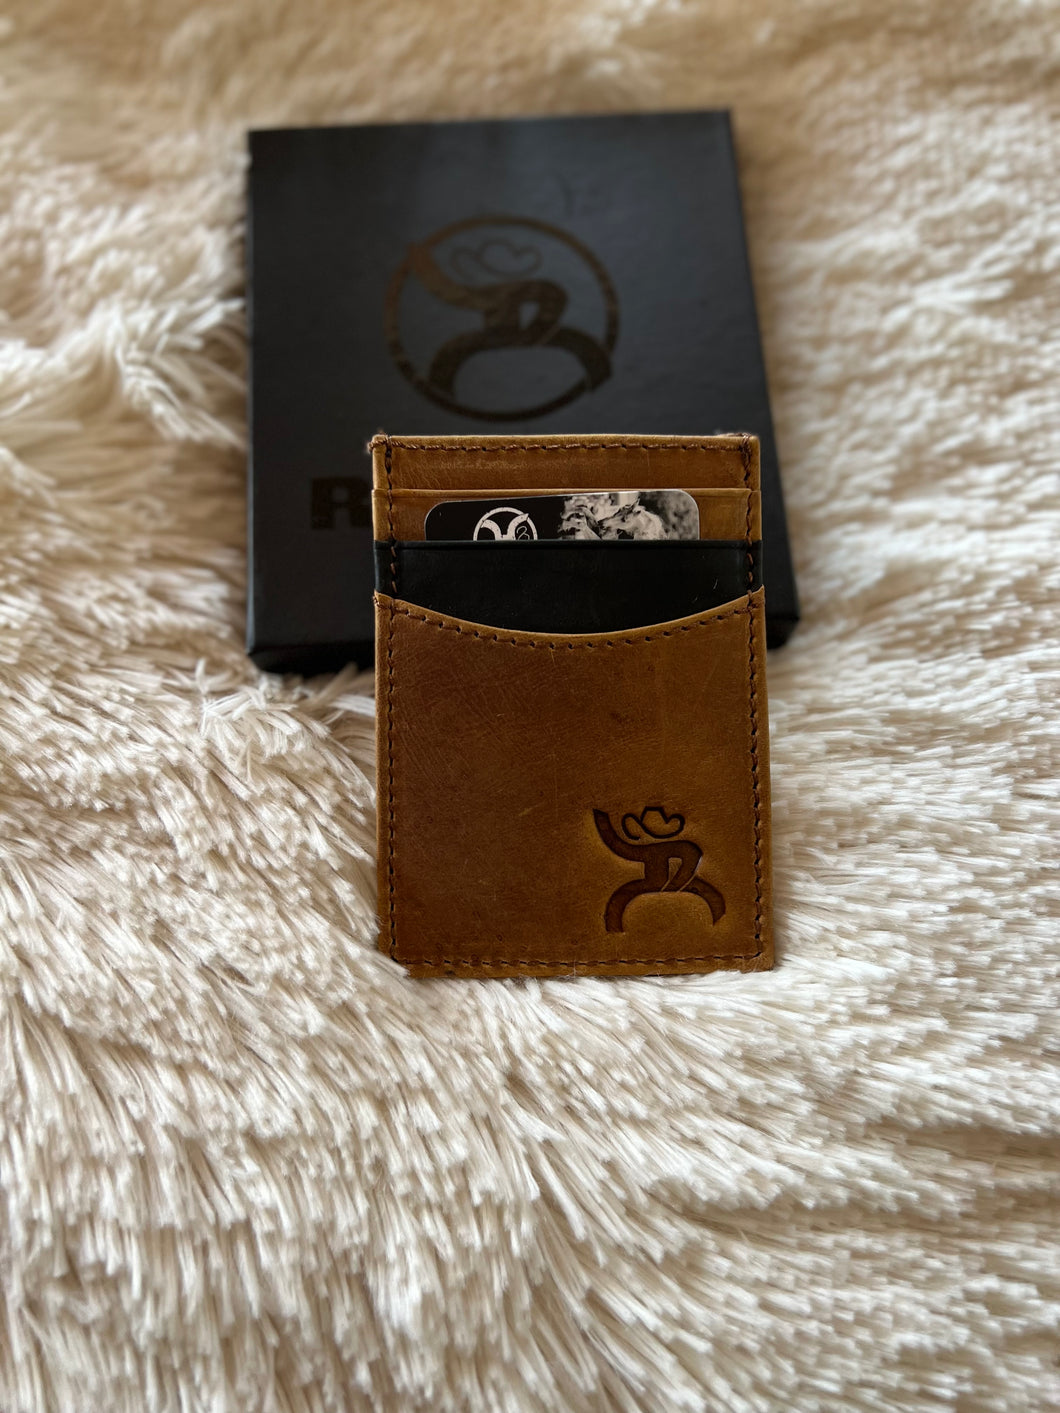 Roughy Branded Money Clip w/Black Leather Accent Pocket